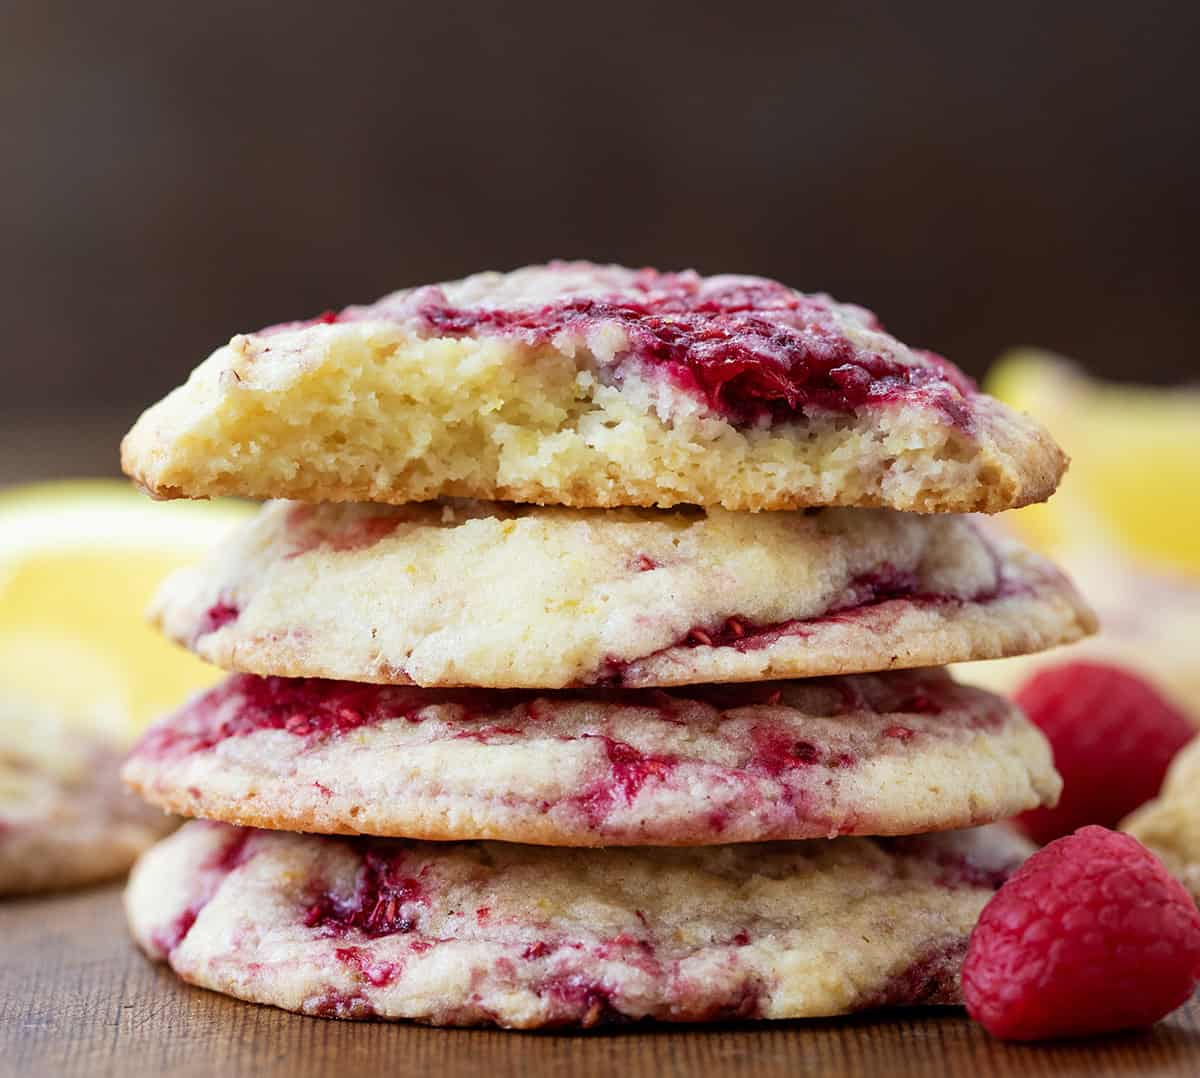 Stack of Lemon Raspberry Cookies on a wooden table straight on with top cookie halved showing inside texture.